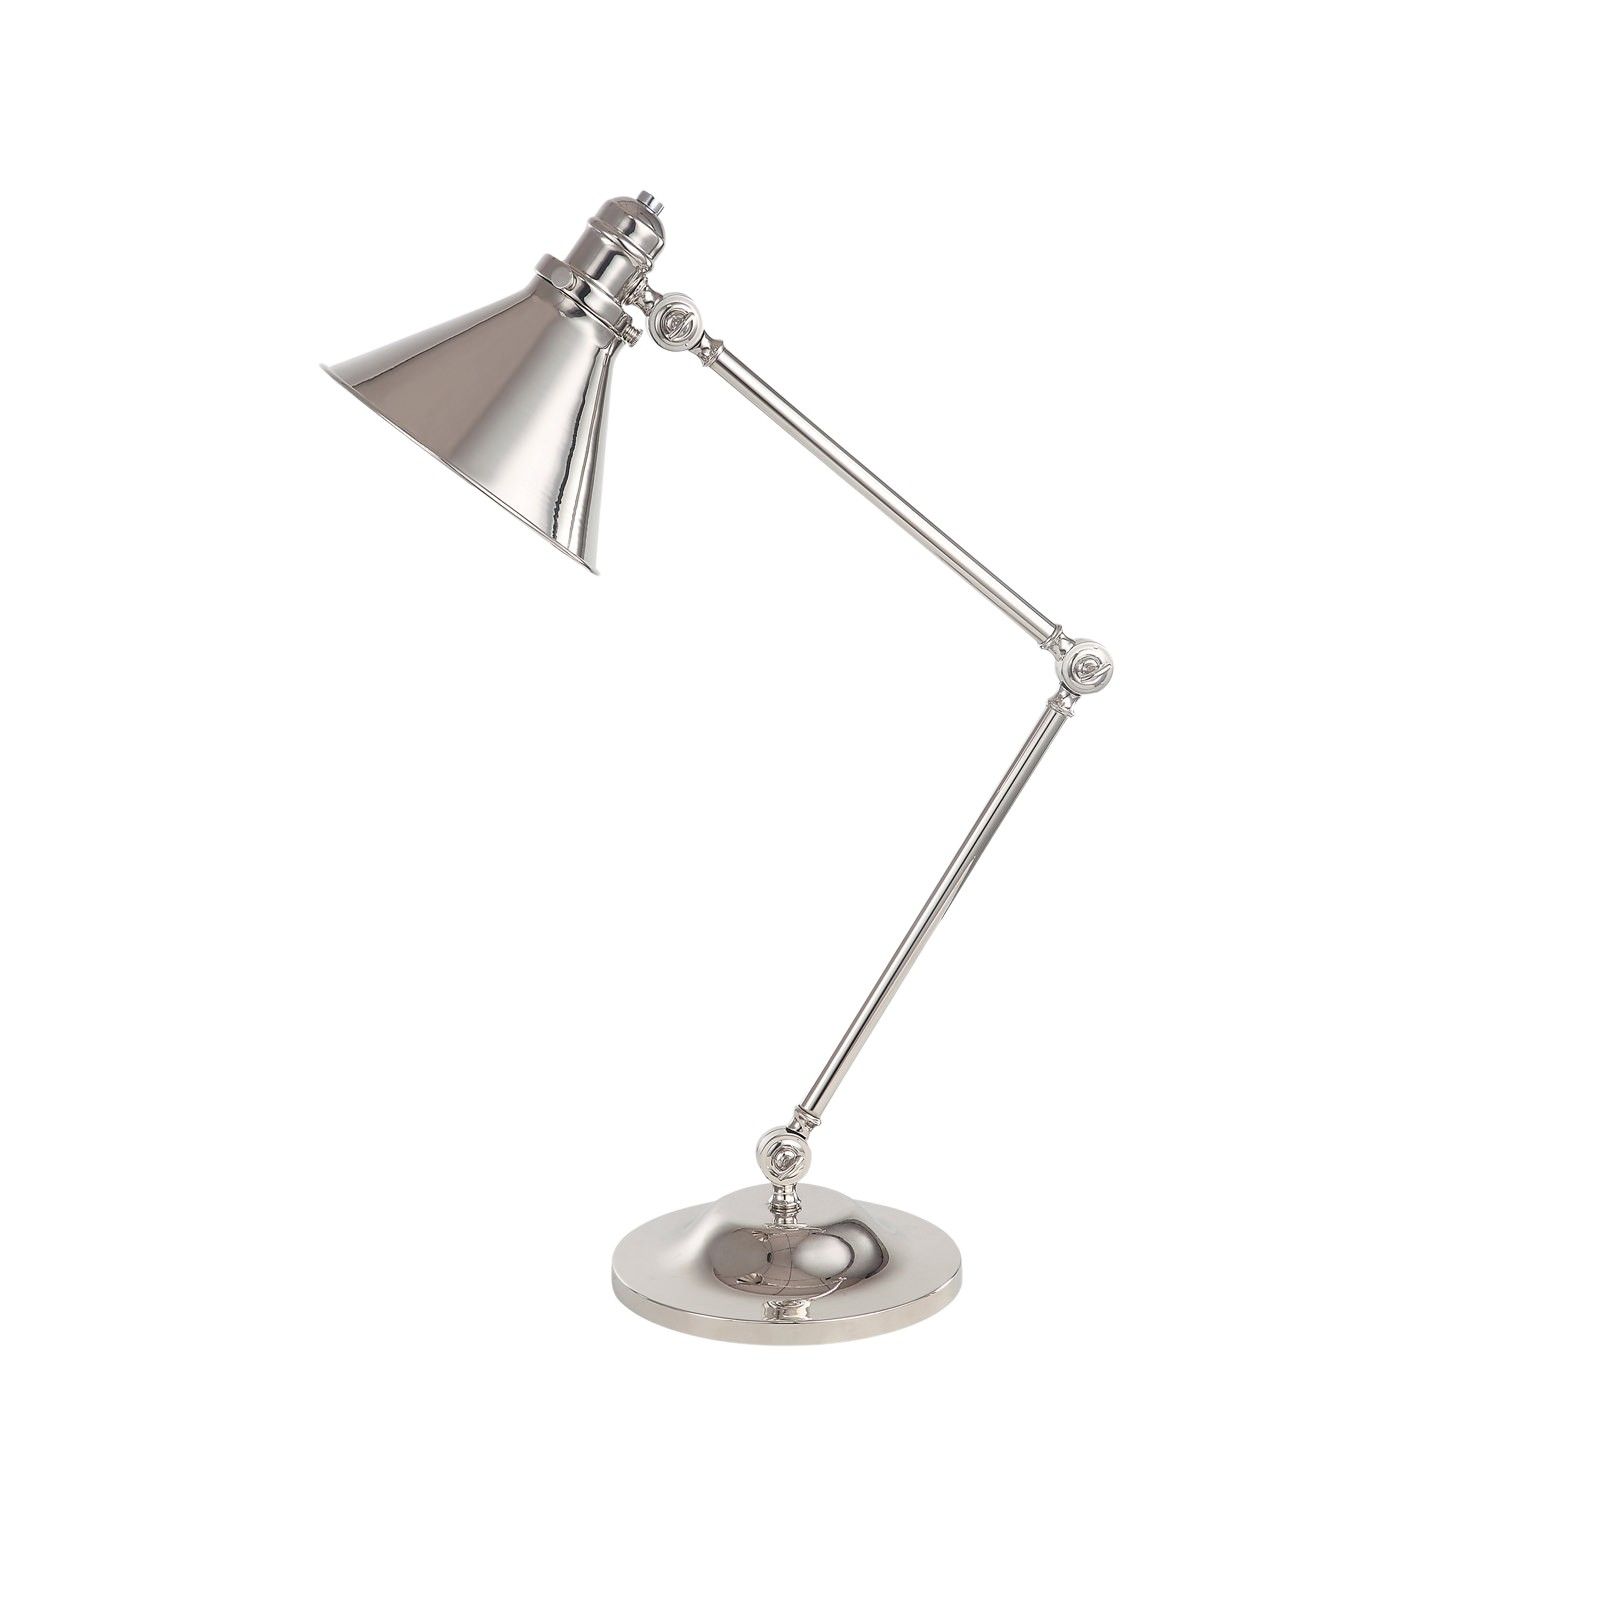 Provence table lamp in Polished Nickel